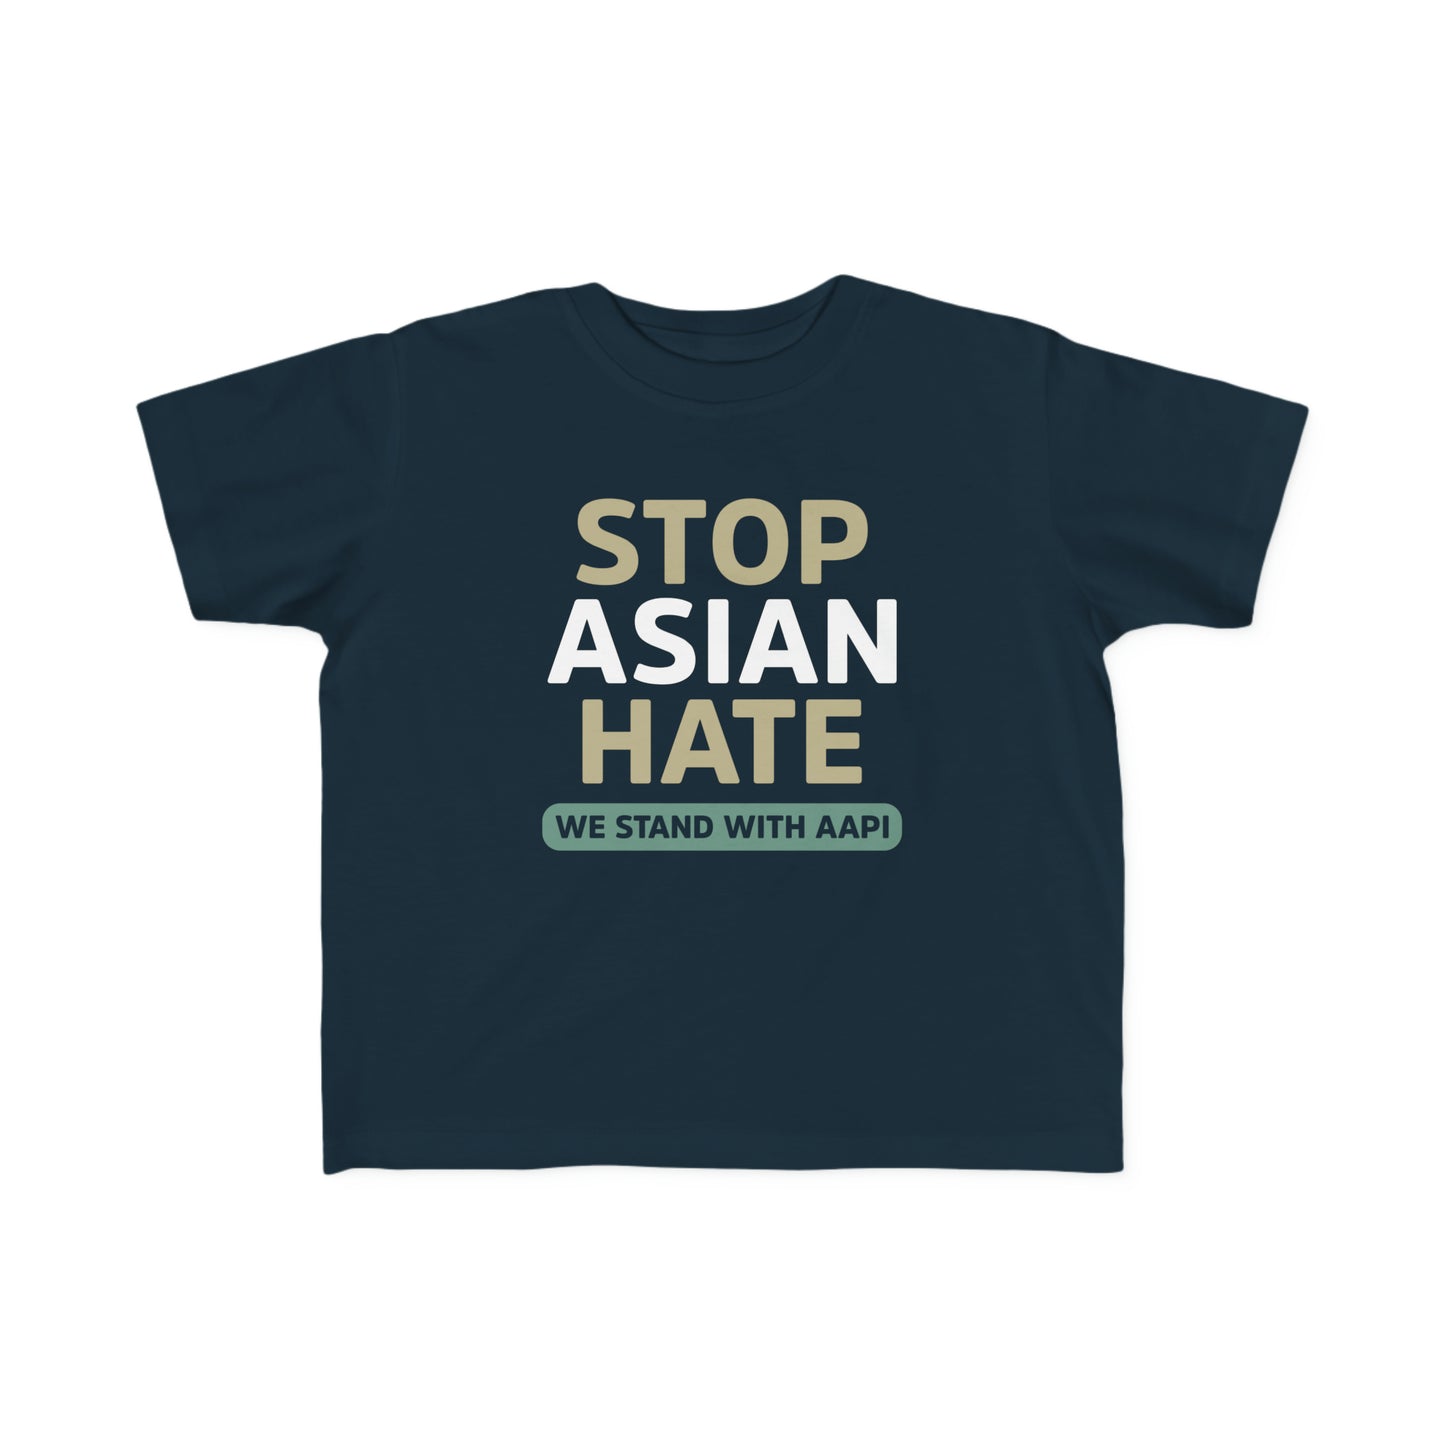 “Stop Asian Hate” Toddler's Tee